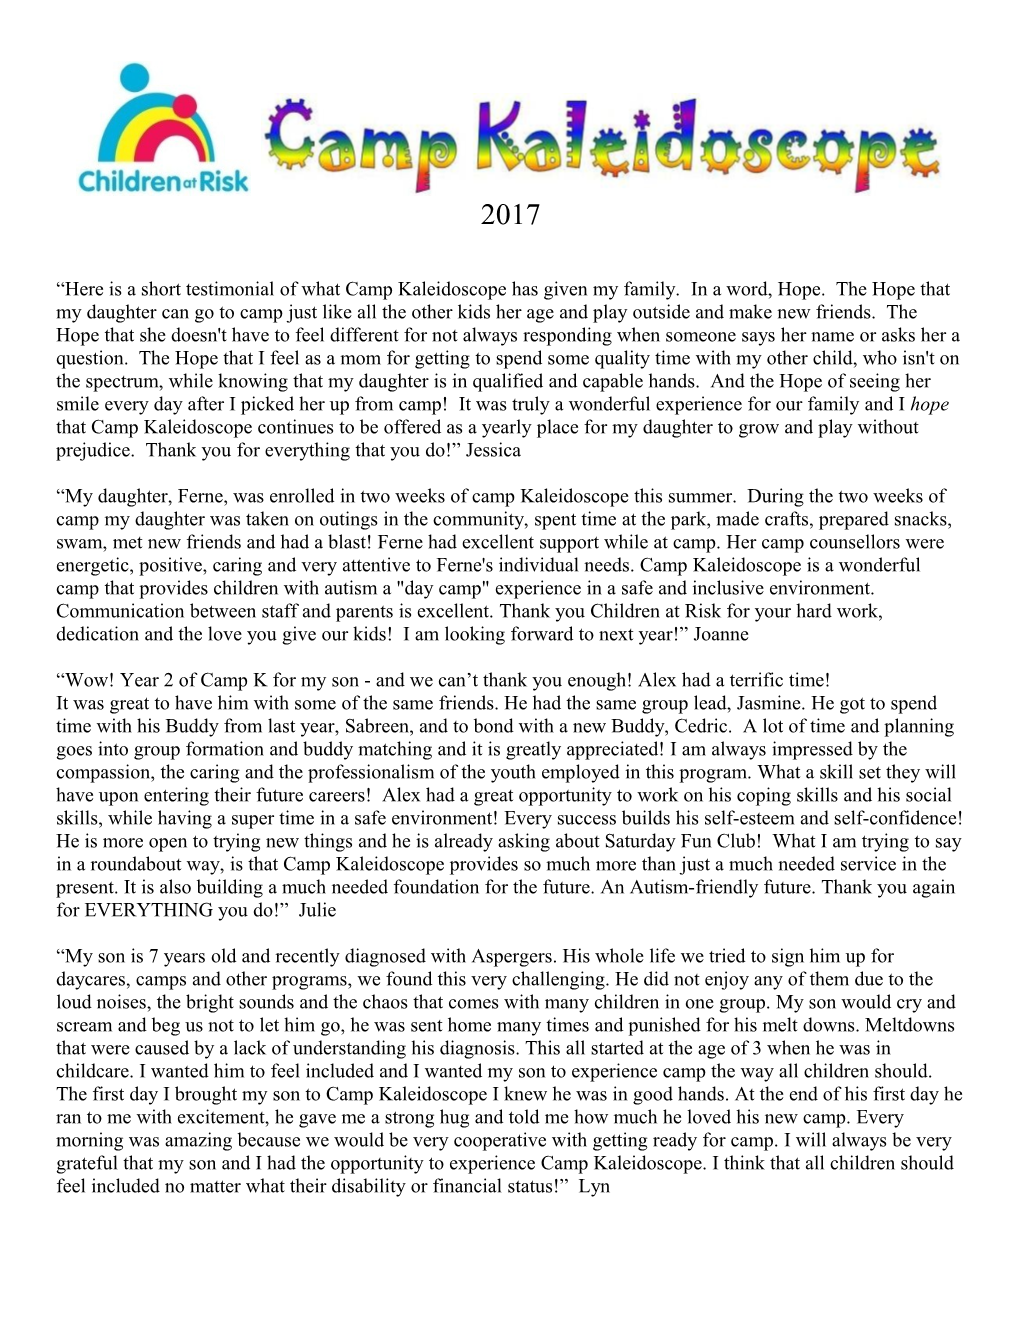 Here Is a Short Testimonial of What Camp Kaleidoscope Has Given My Family. in a Word